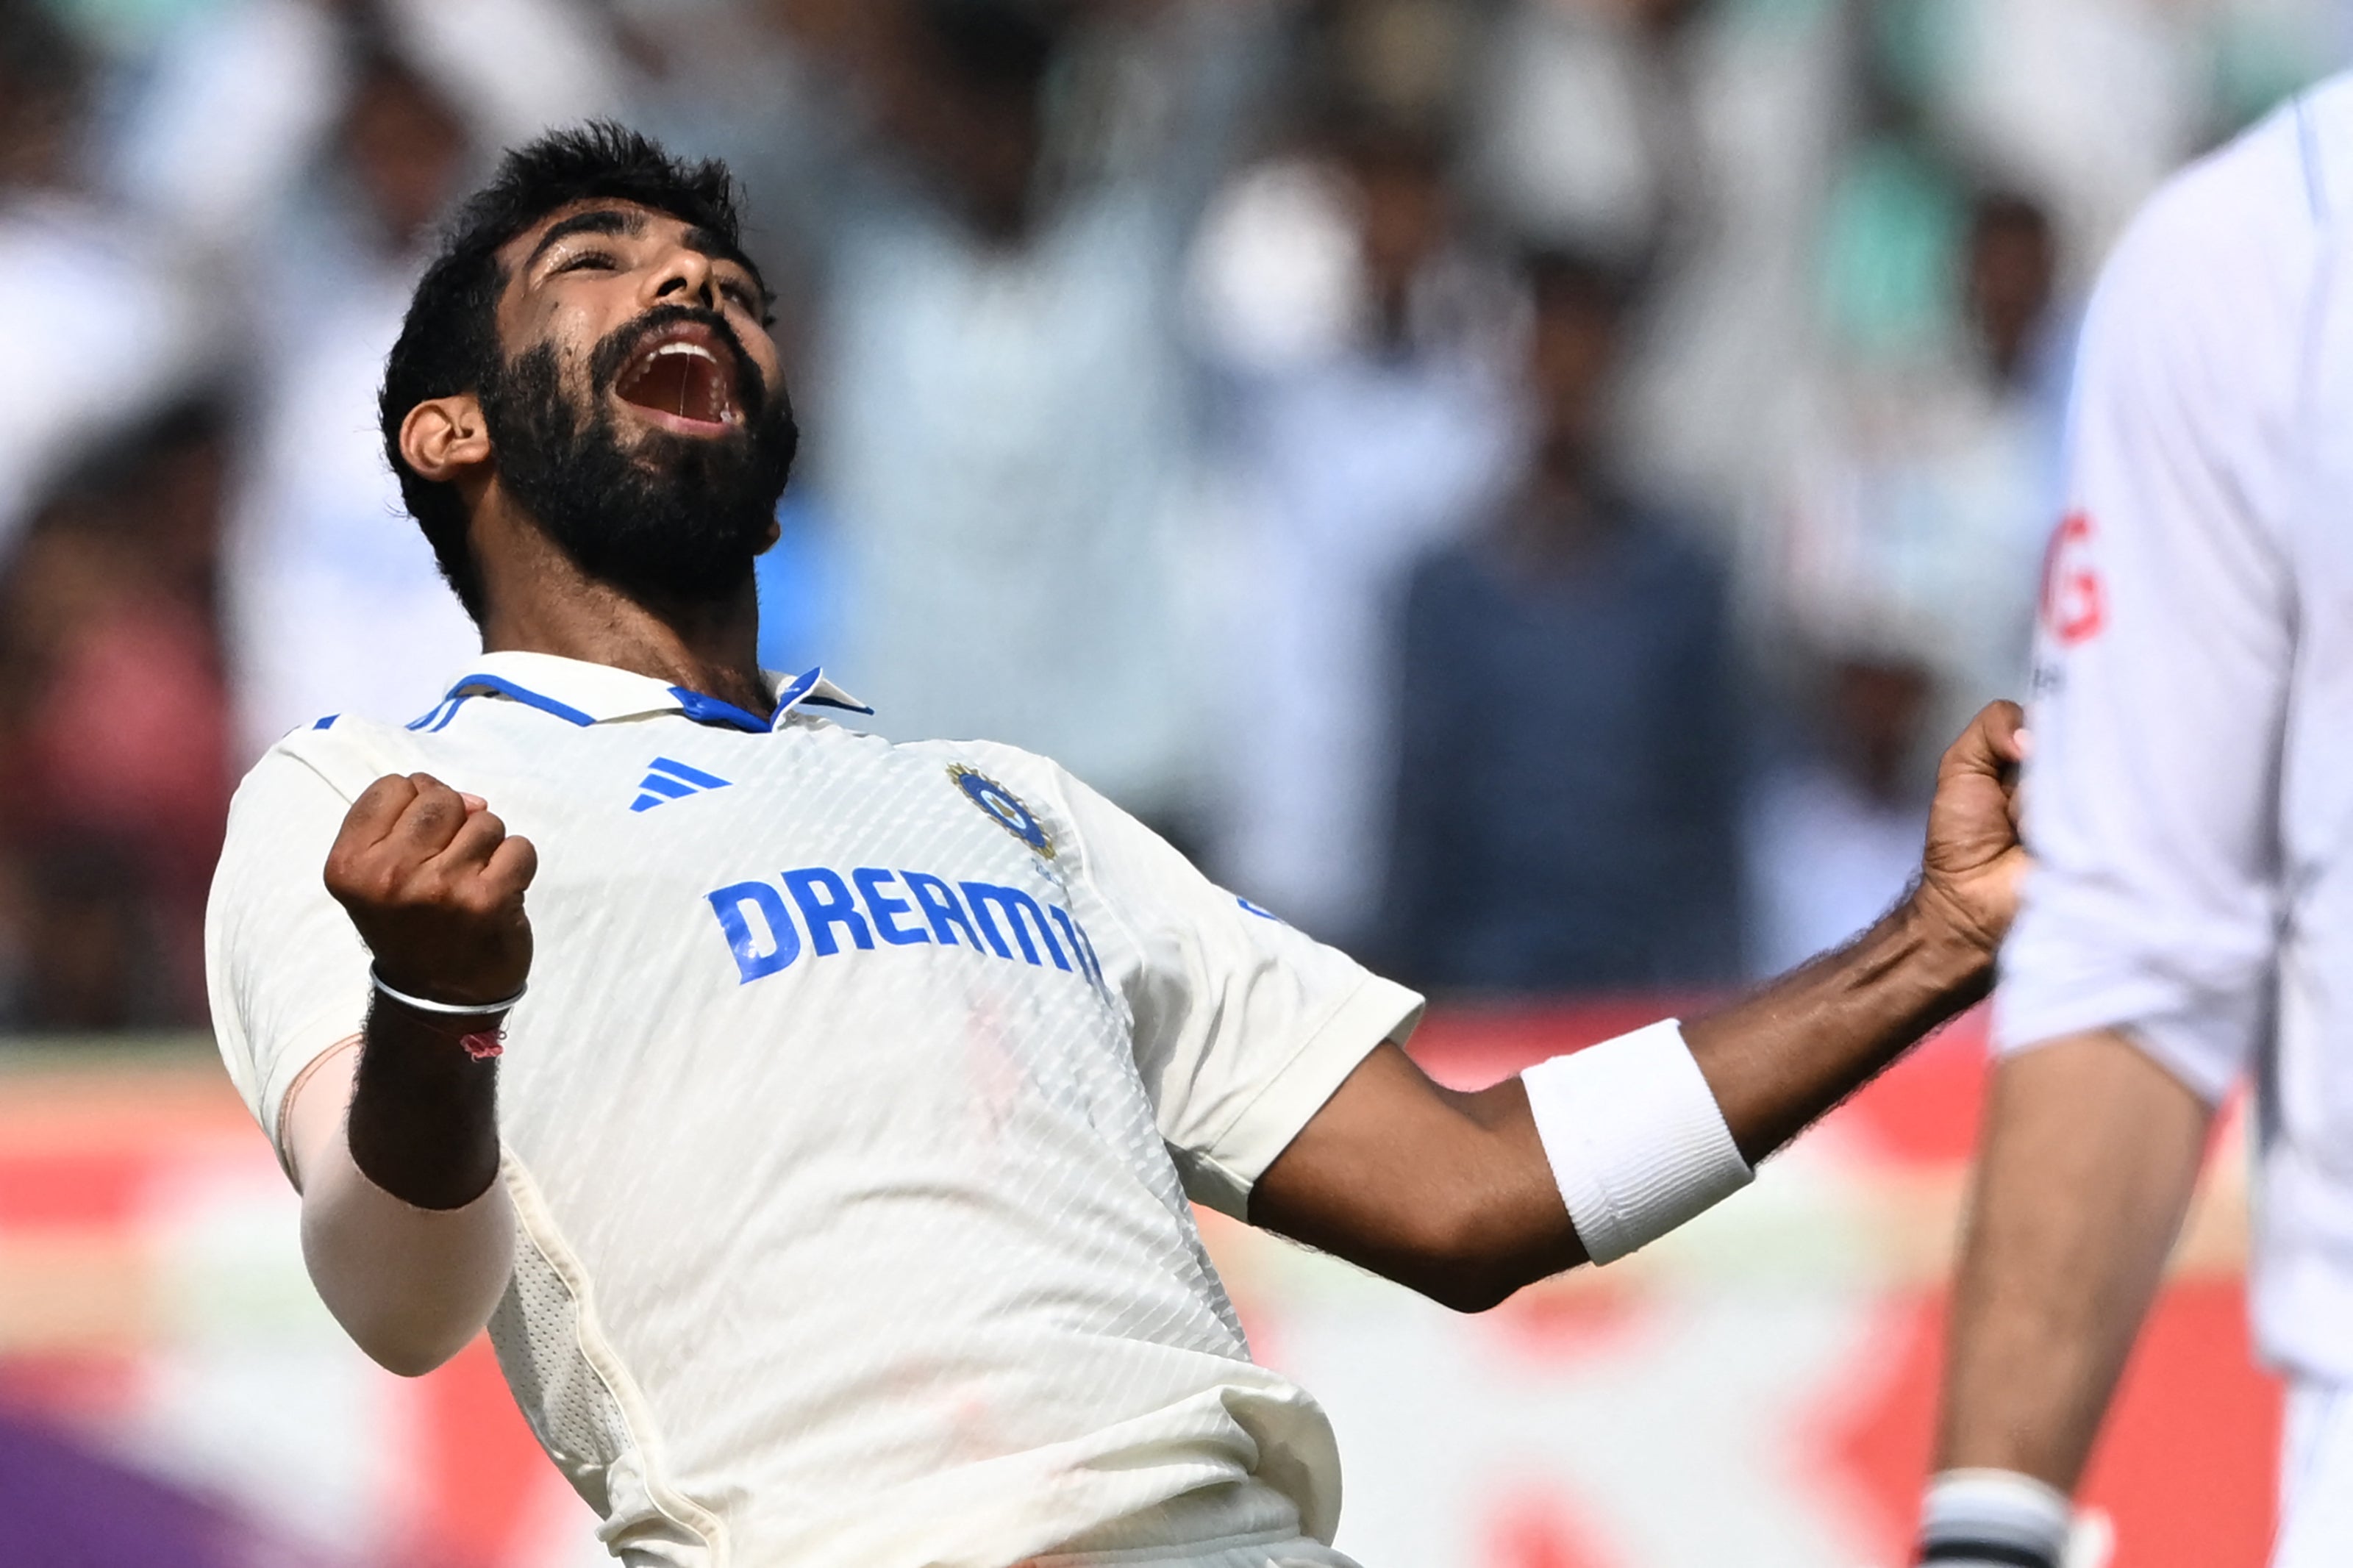 Jasprit Bumrah has got the measure of the England batting attack